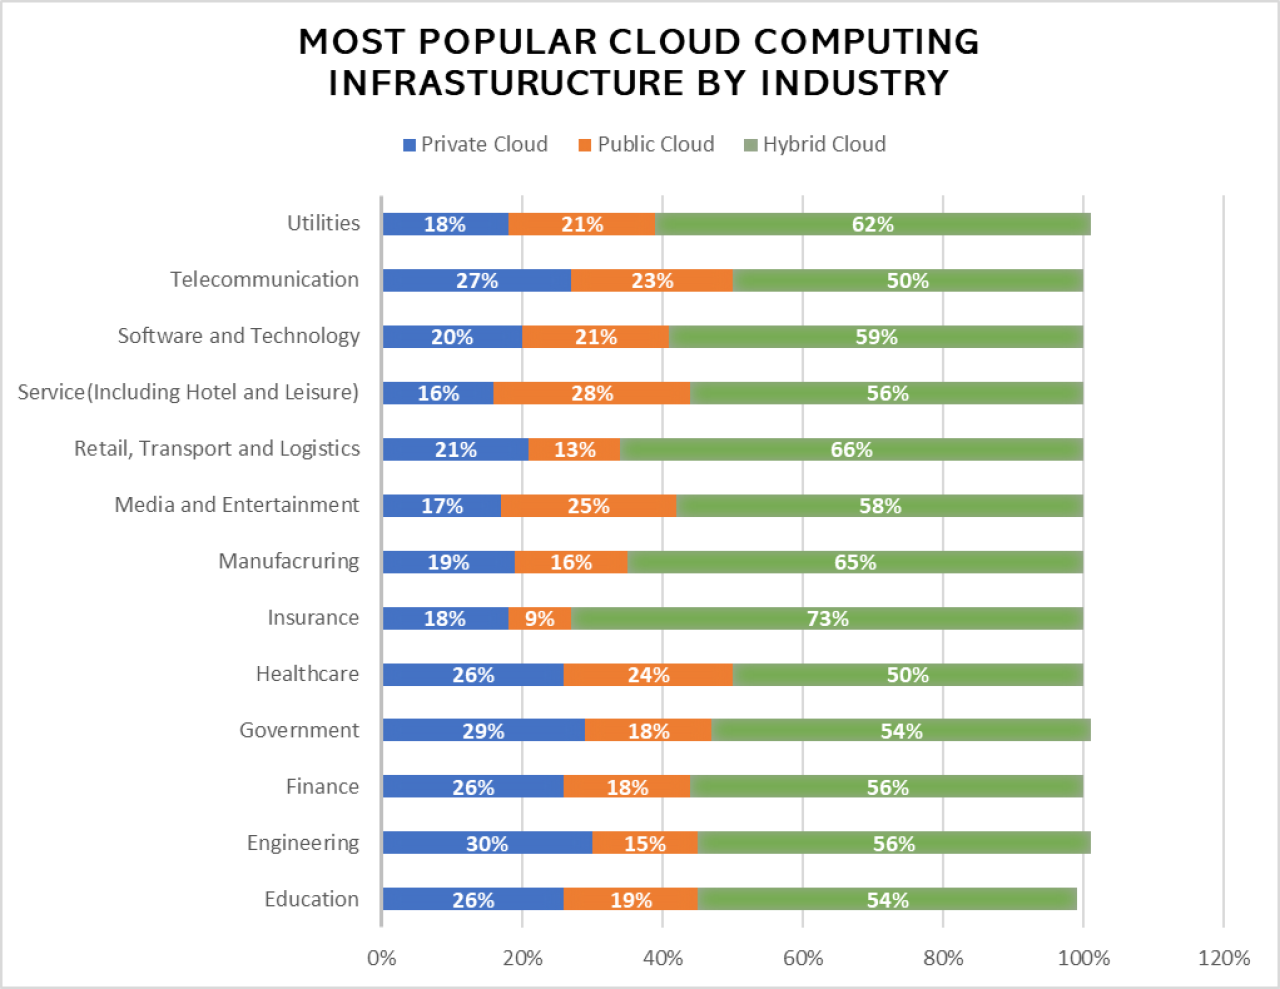 Cloud computing infrastructure by industry.